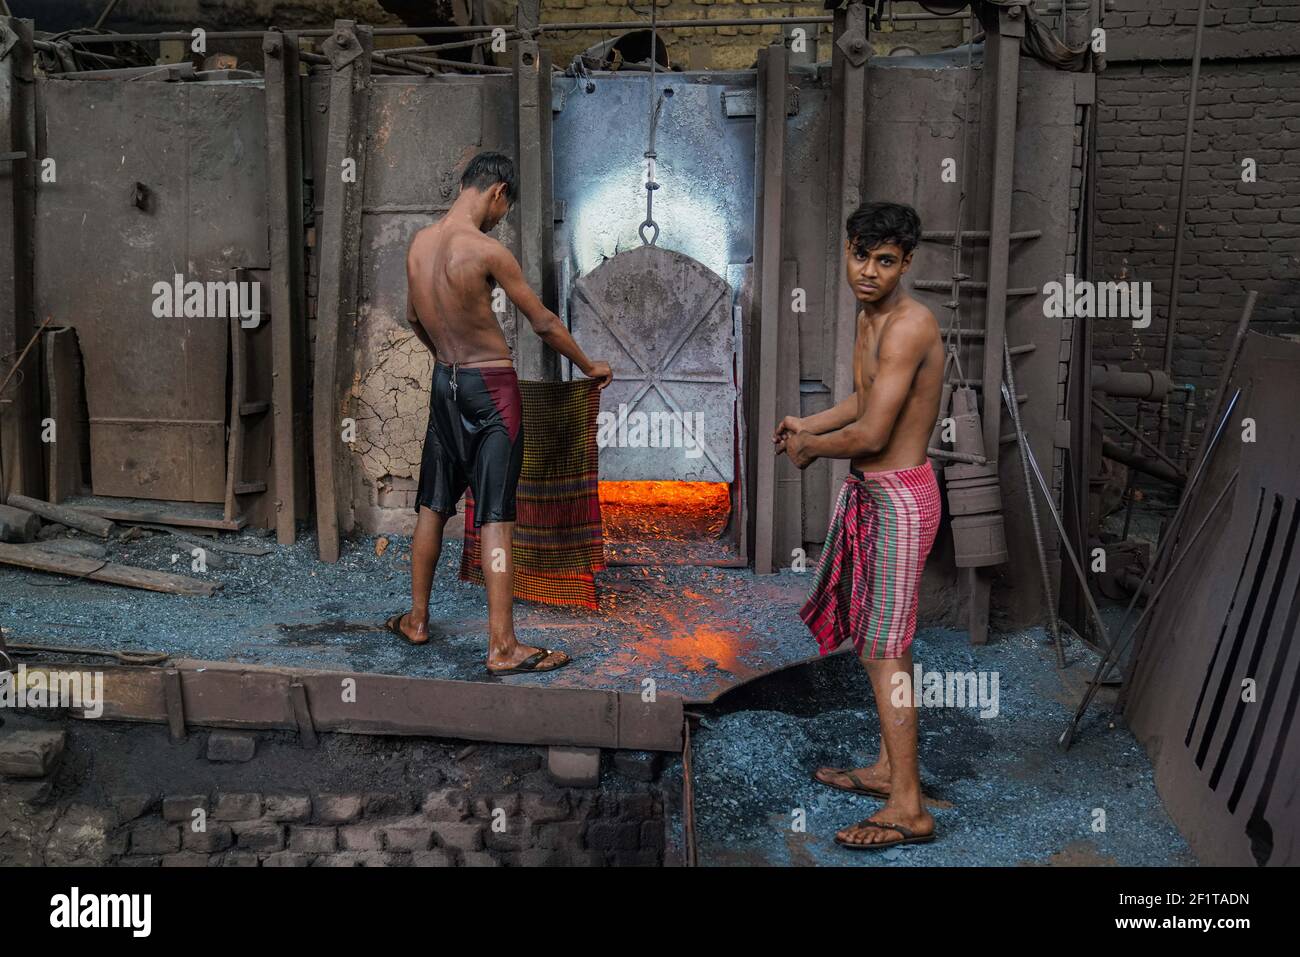 A rolling mill worker seen working in the steel re-rolling mill without proper safety gear or tools in Dhaka, Bangladesh on March 9, 2021. Stock Photo